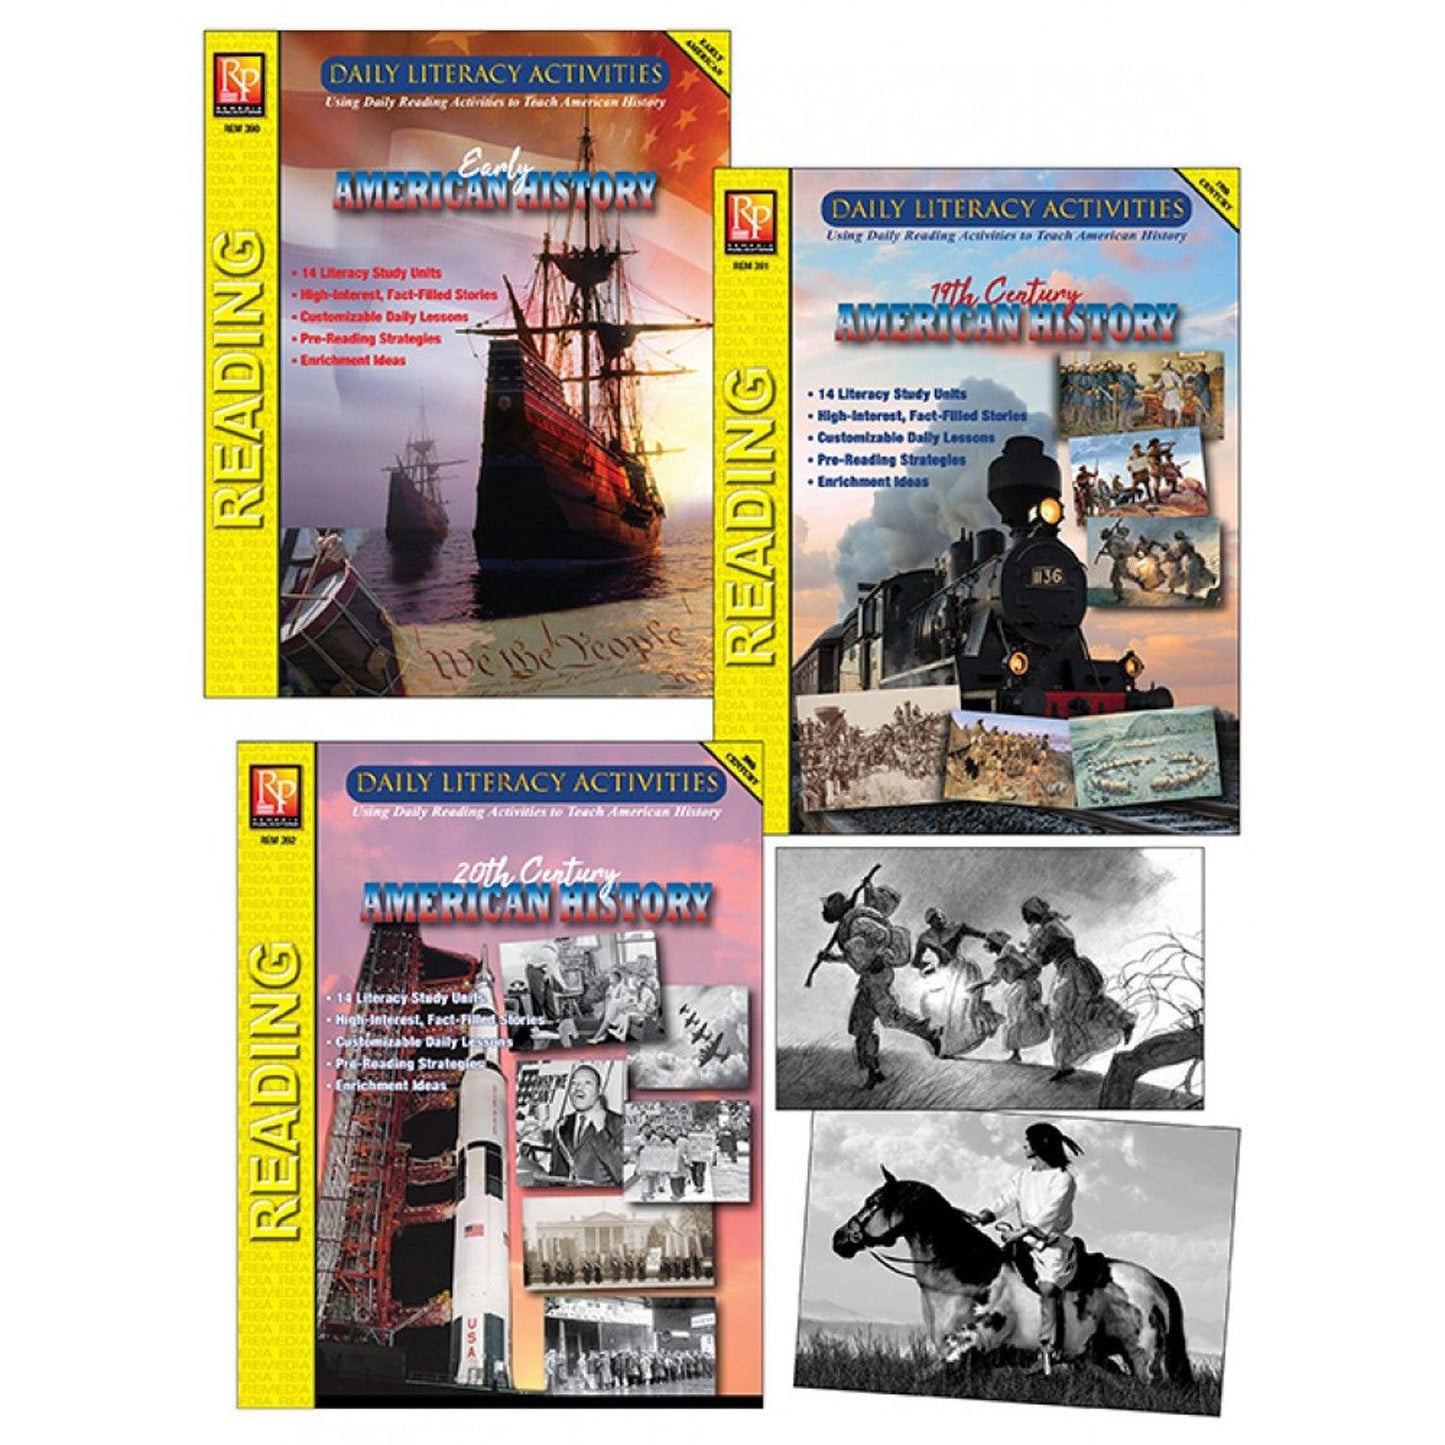 Daily Literacy Activities: American History Complete Set of 3 Titles - Loomini